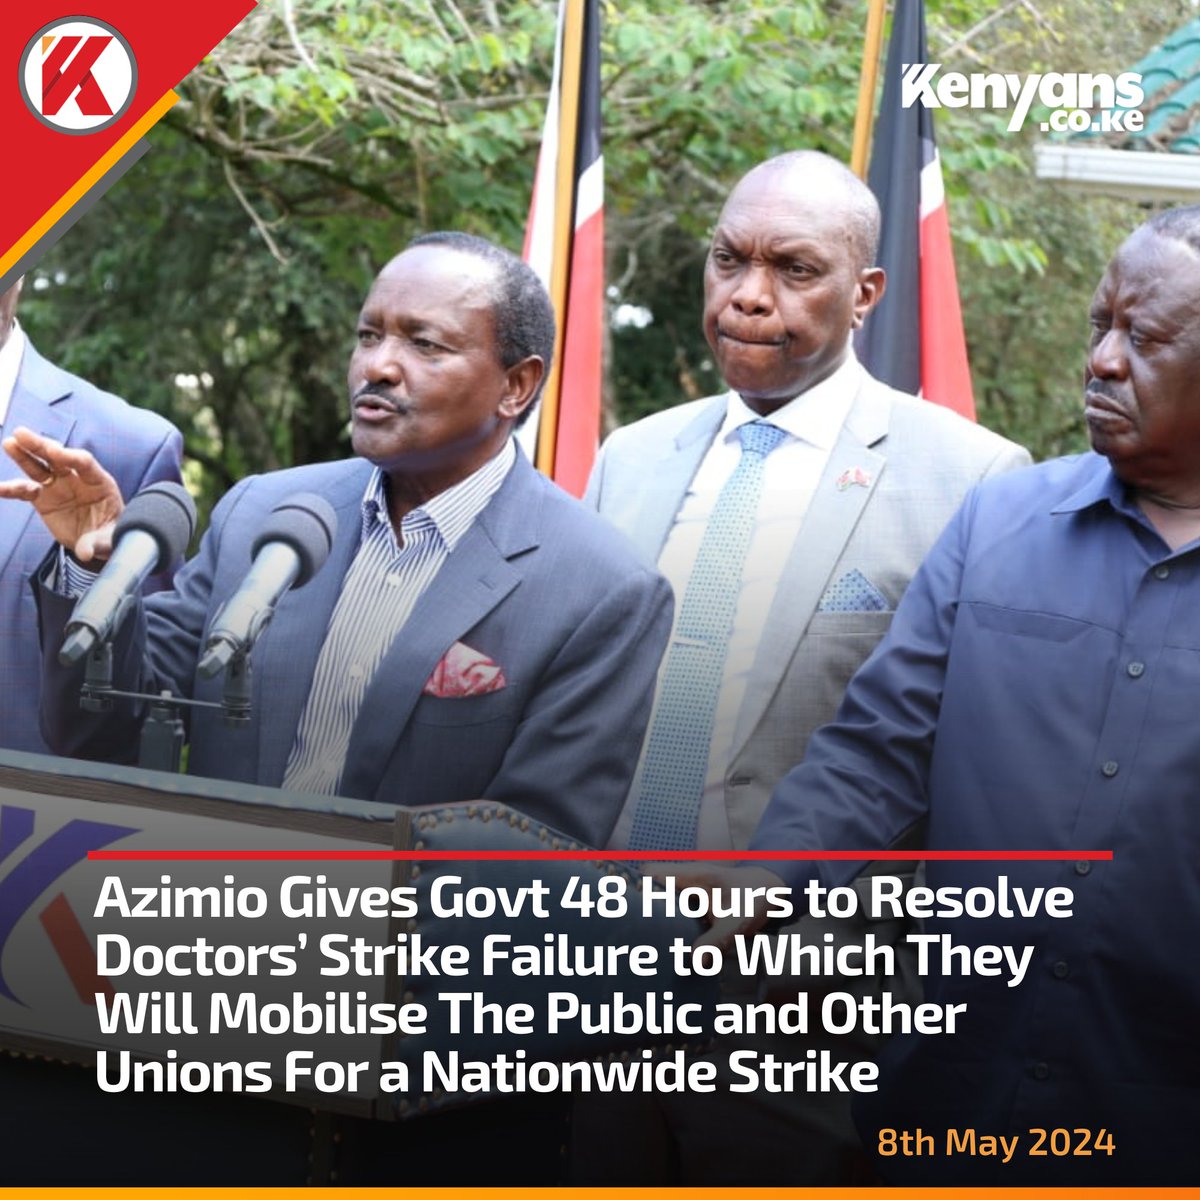 Azimio gives govt 48 hours to resolve doctors' strike failure to which they will mobilise the public and other unions for a nationwide strike